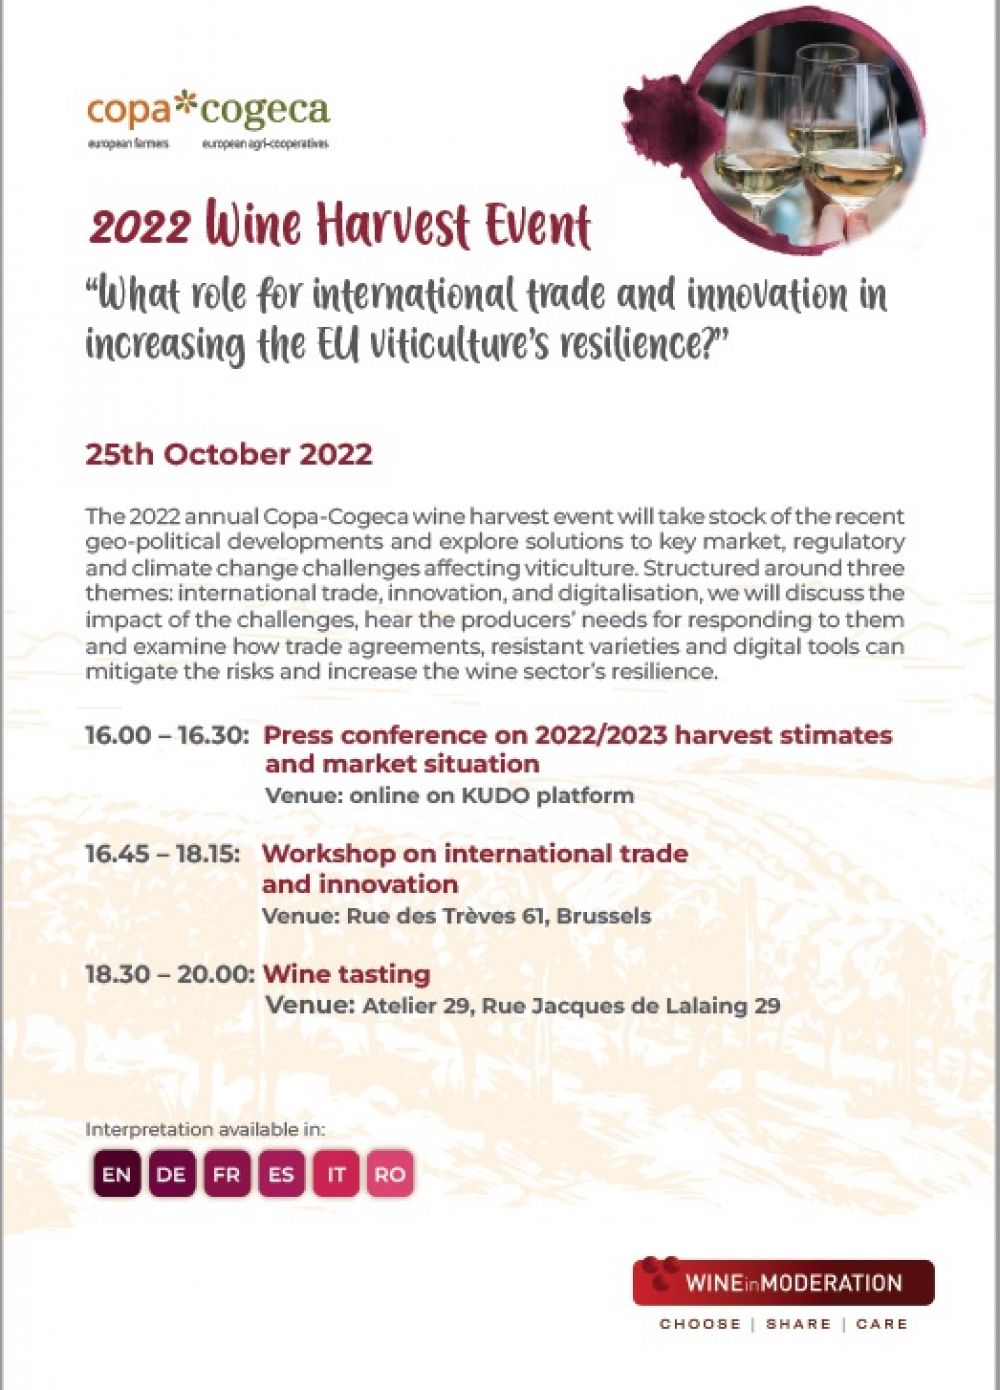 Copa-Cogeca displays important commitment to Wine in Moderation at annual Harvest event